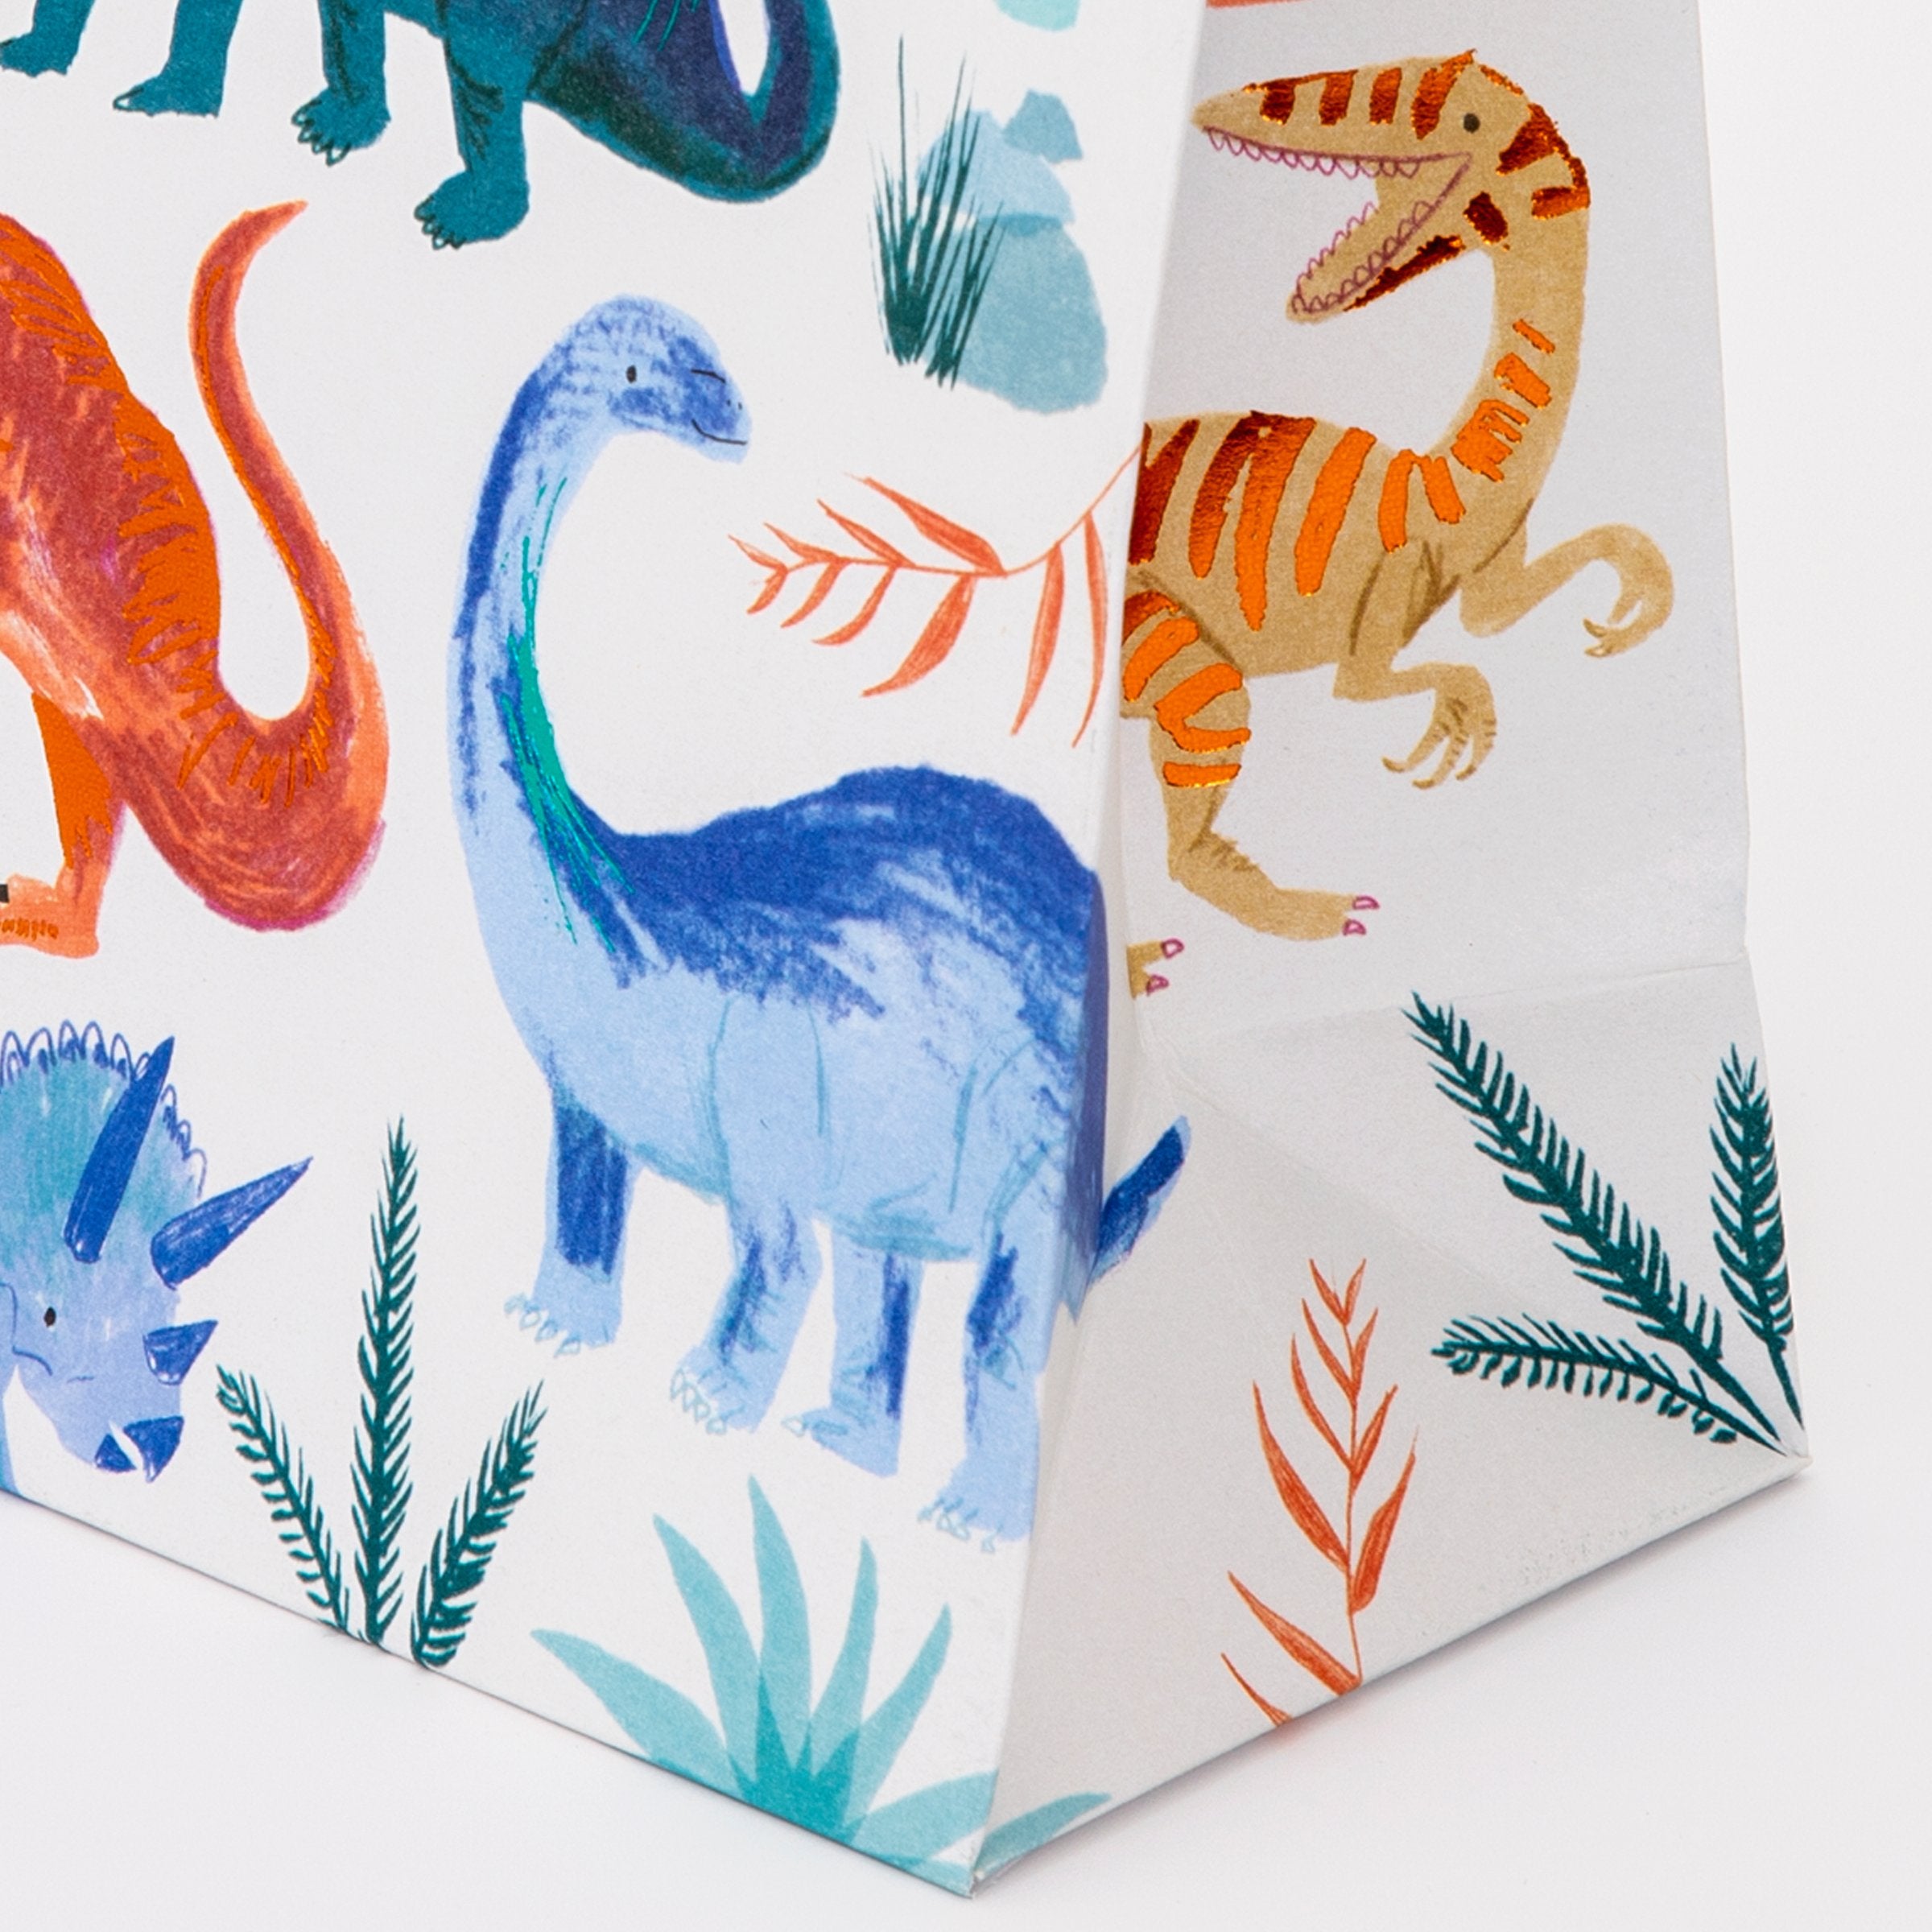 Our colourful dinosaur goodie bags, with a twisted paper handle, look amazing.